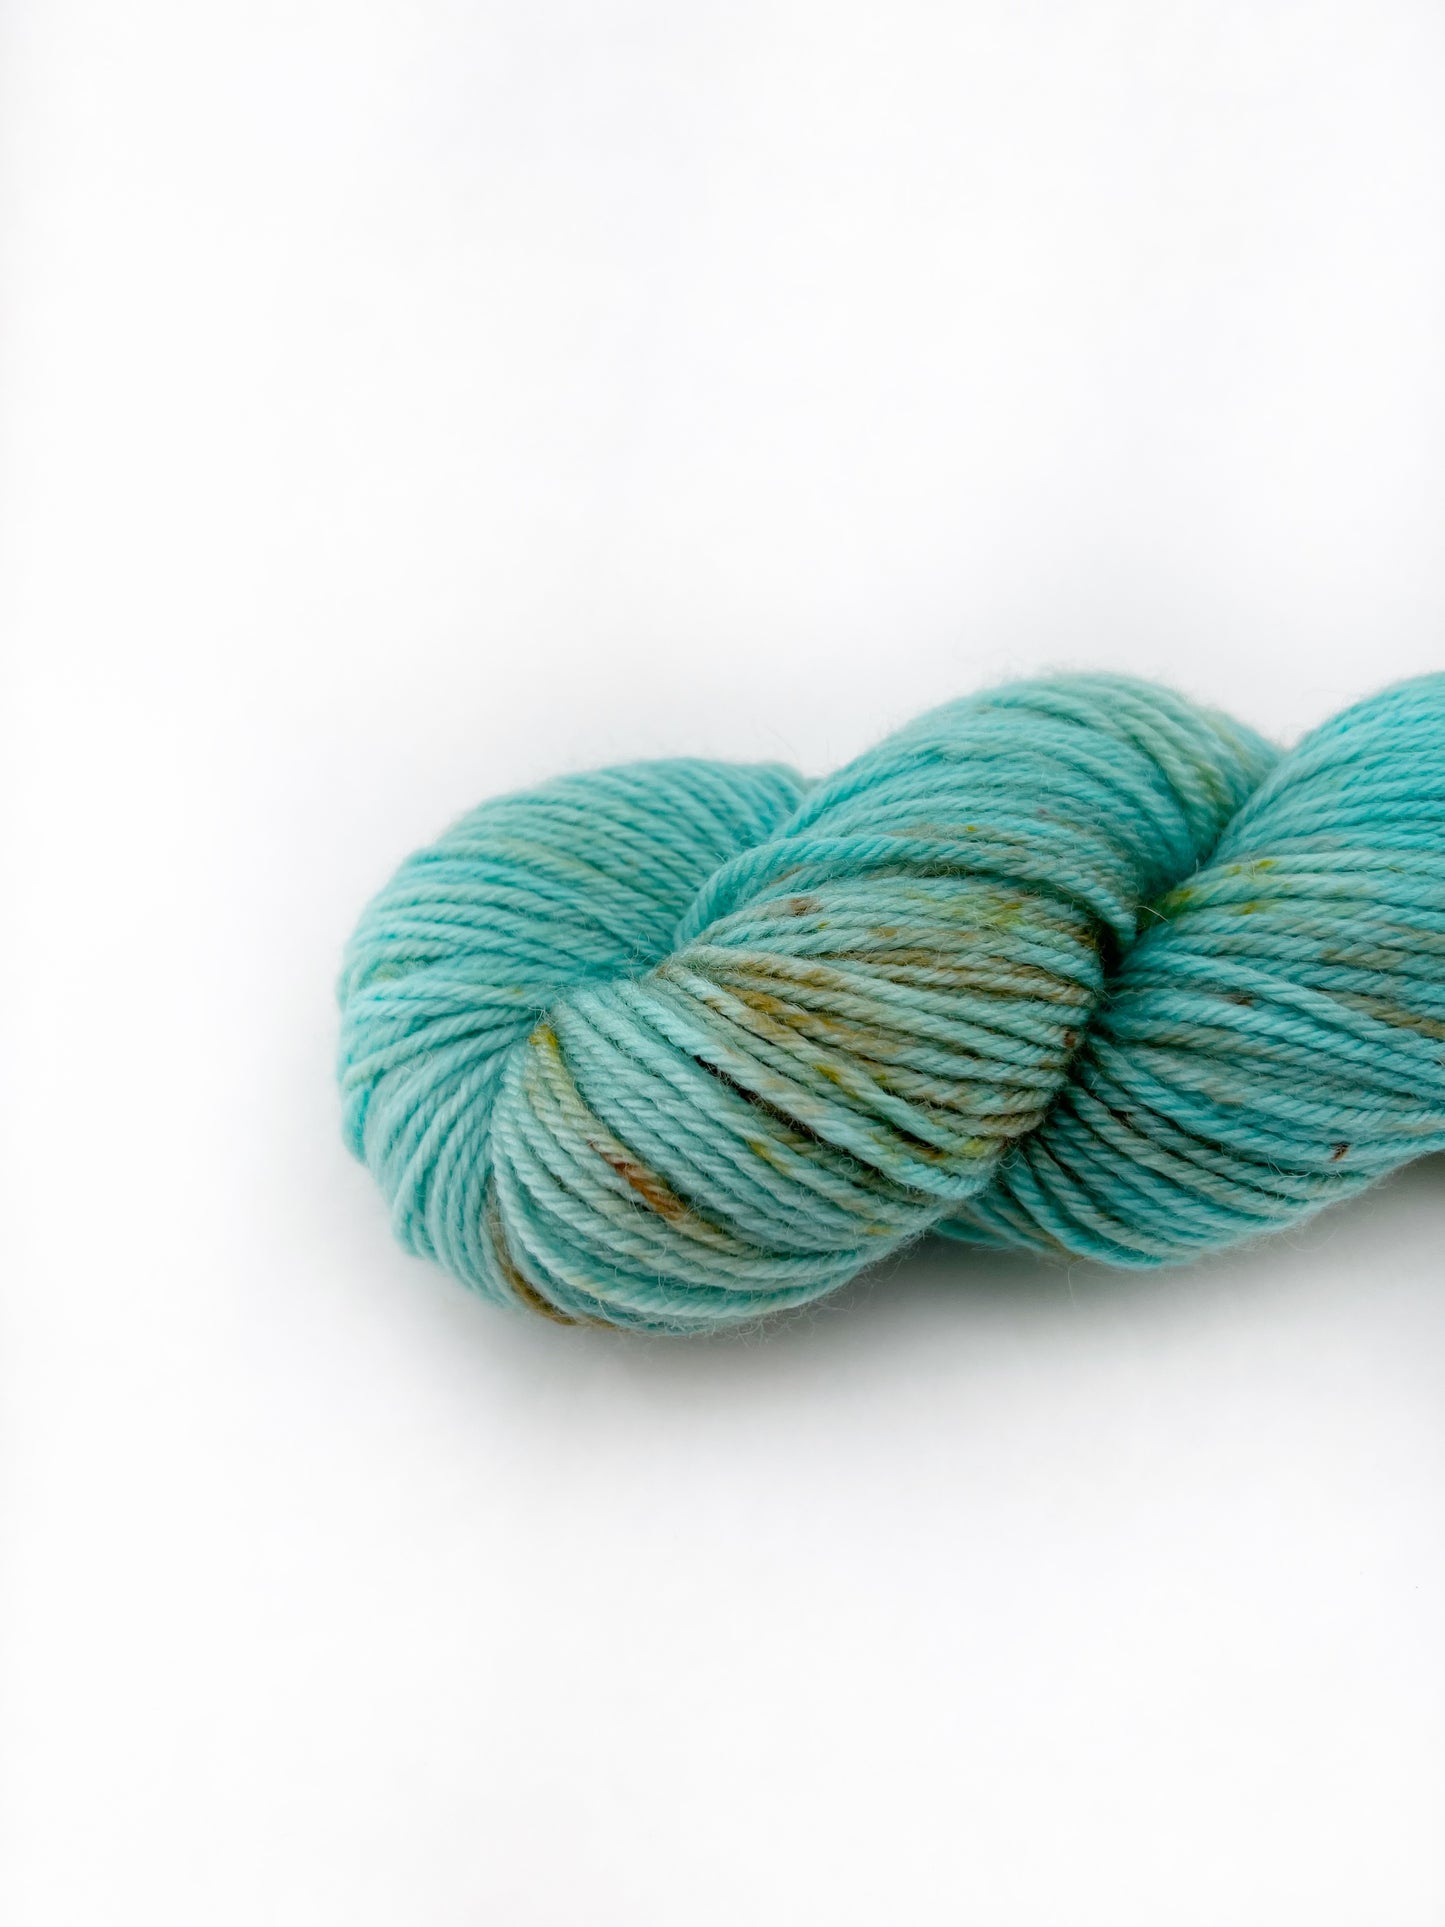 TARNISHED TURQUOISE - OOPSIE! Turquoise Blue Brown Speckled DK